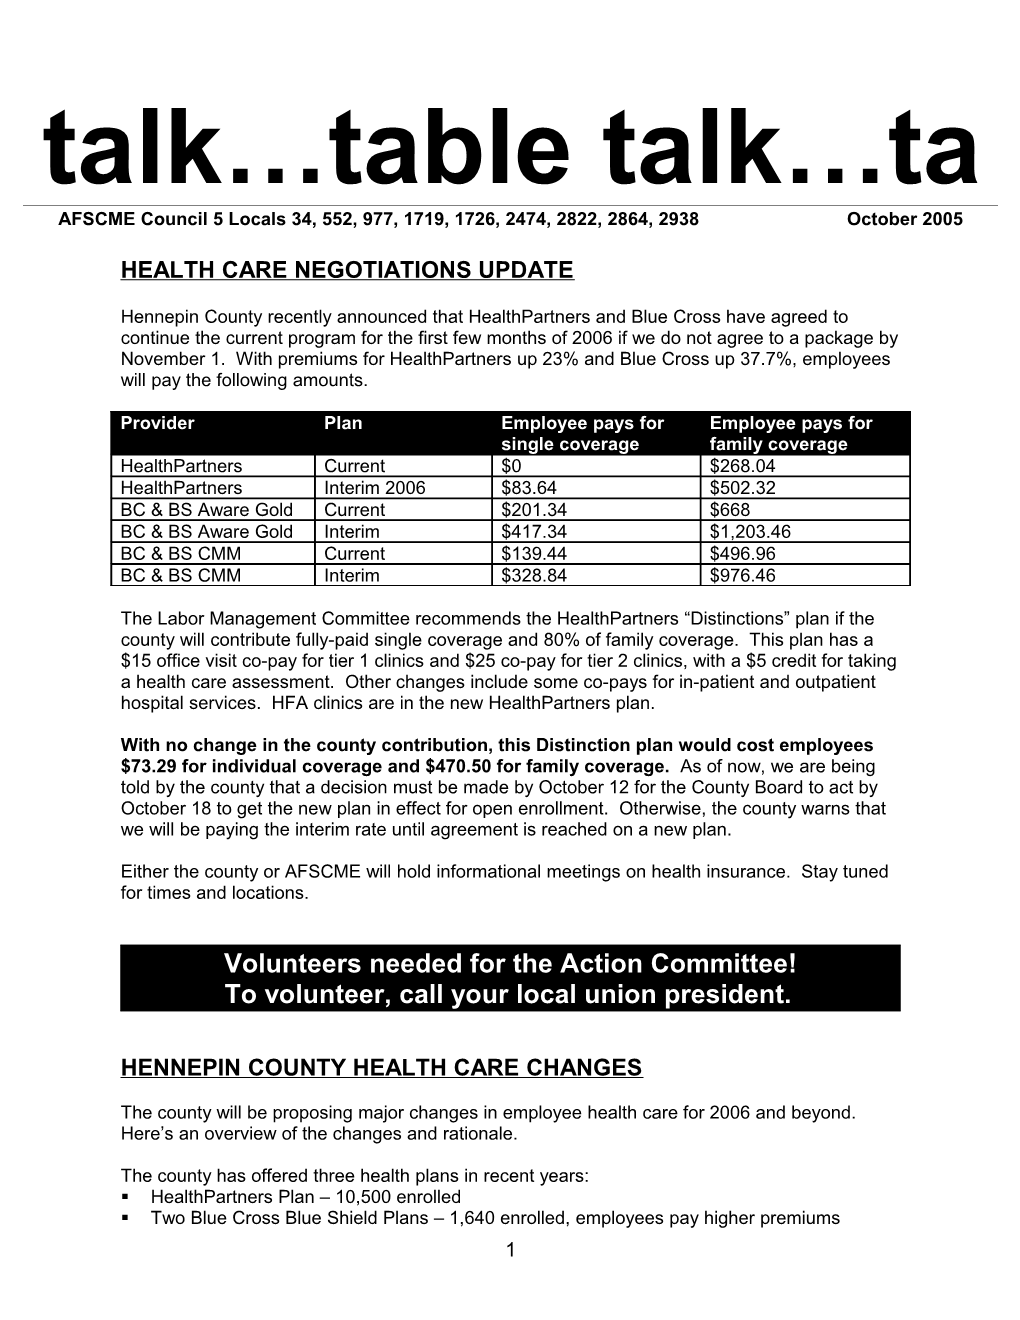 Hennepin County Health Care Changes